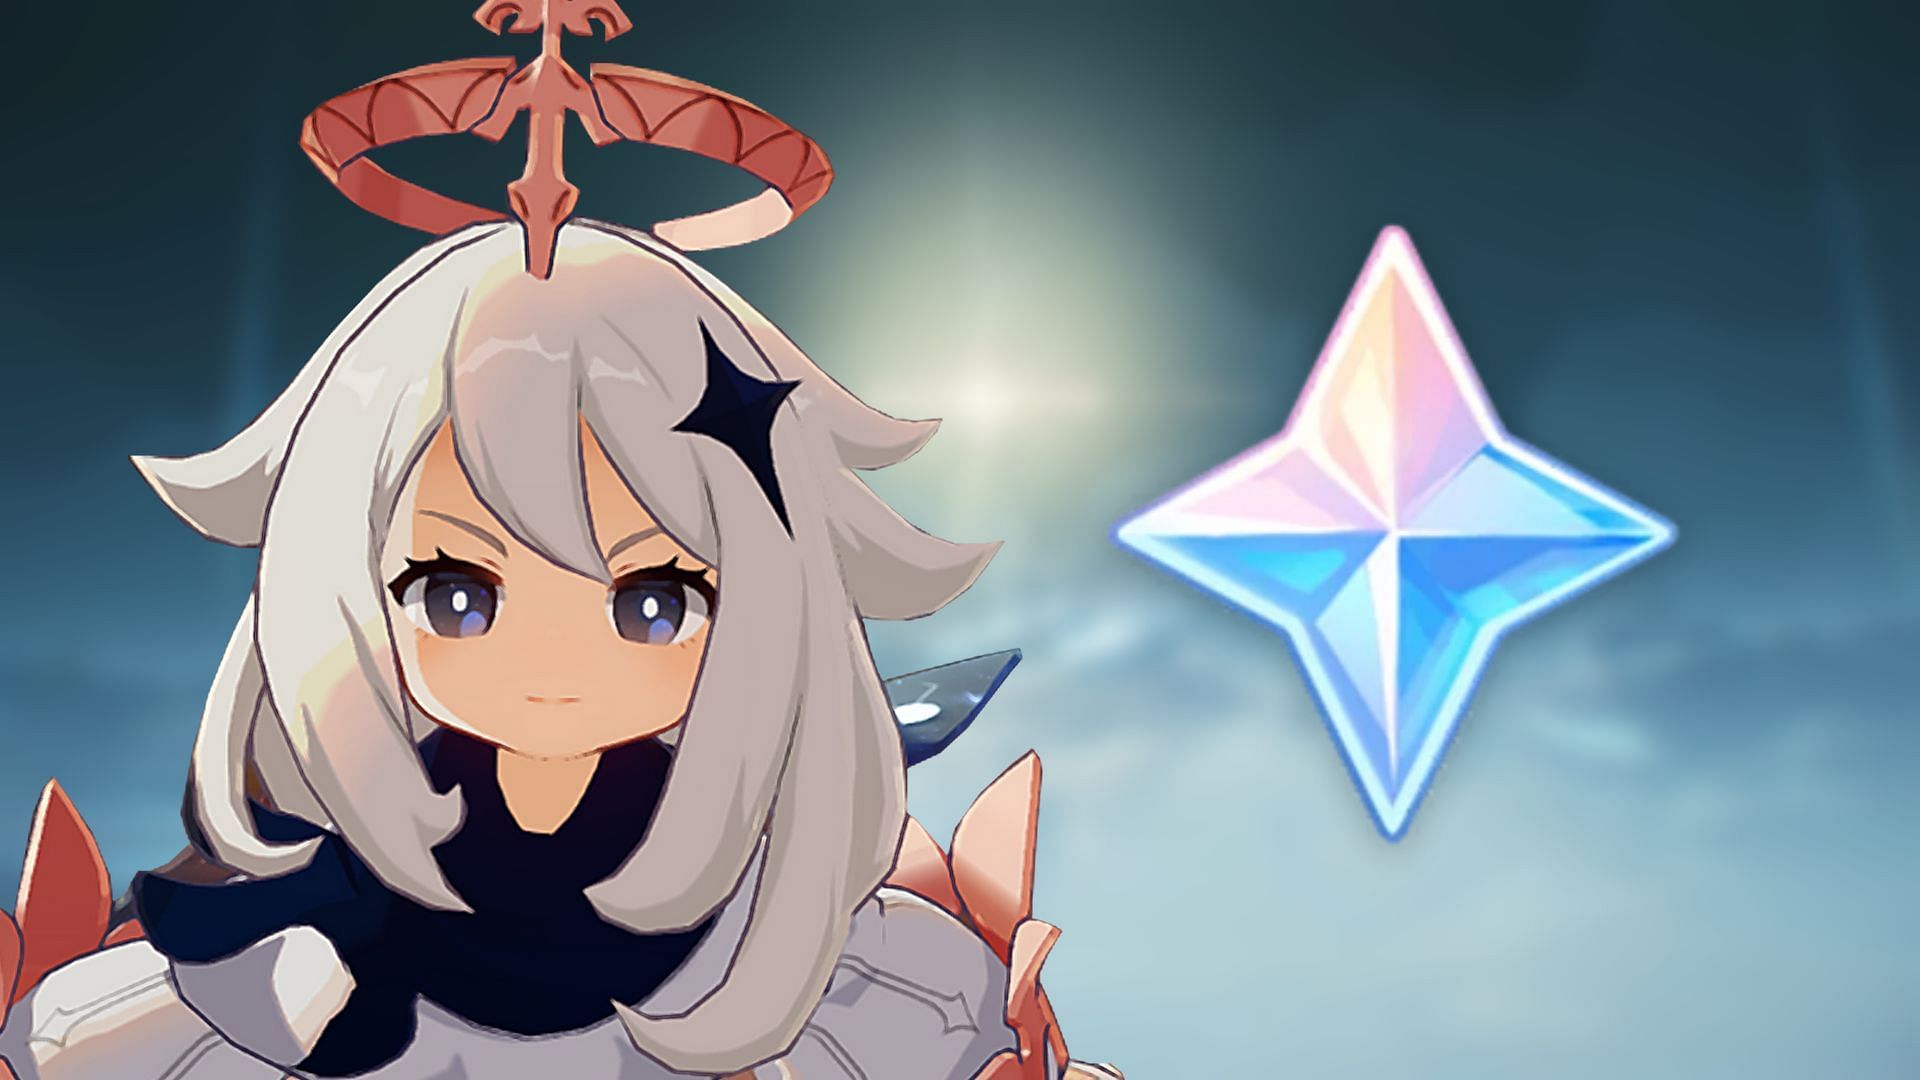 Travelers can earn thousands of Primogems in this update if they&#039;re diligent (Image via miHoYo)